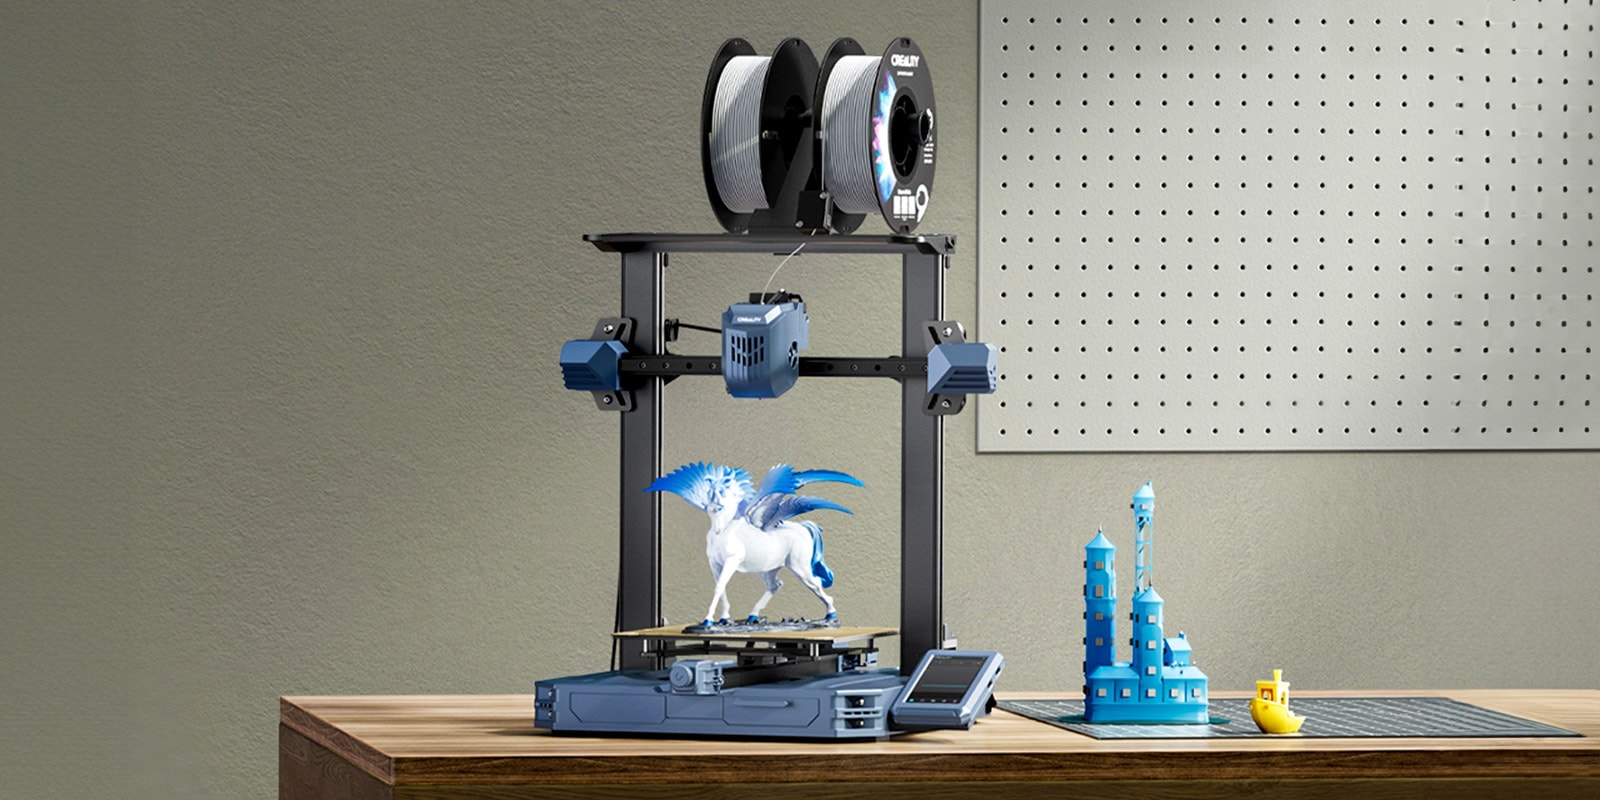 The Creality CR-10 SE 3D printer on a workbench next to several 3D prints.